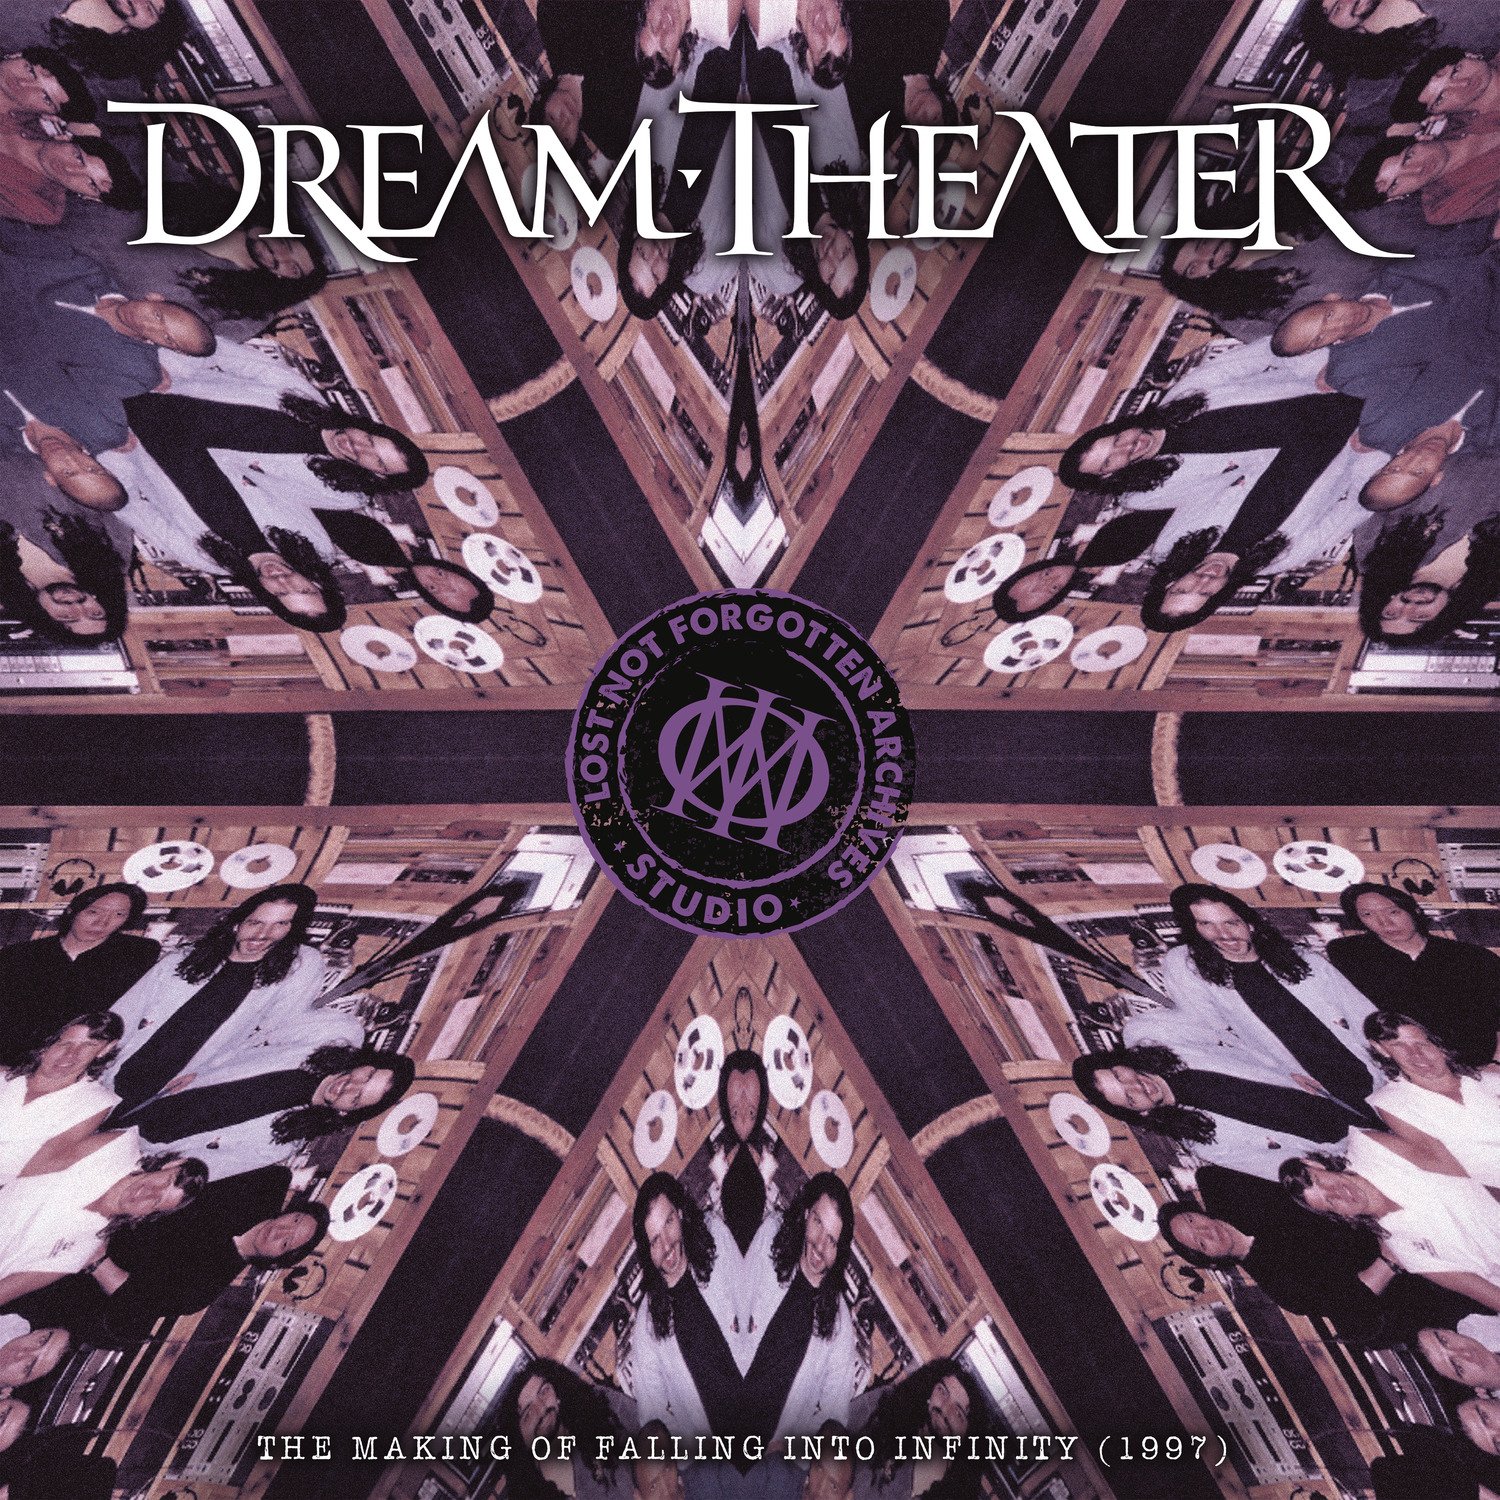 CD Shop - DREAM THEATER Lost Not Forgotten Archives: The Making of Falling Into Infinity (1997)